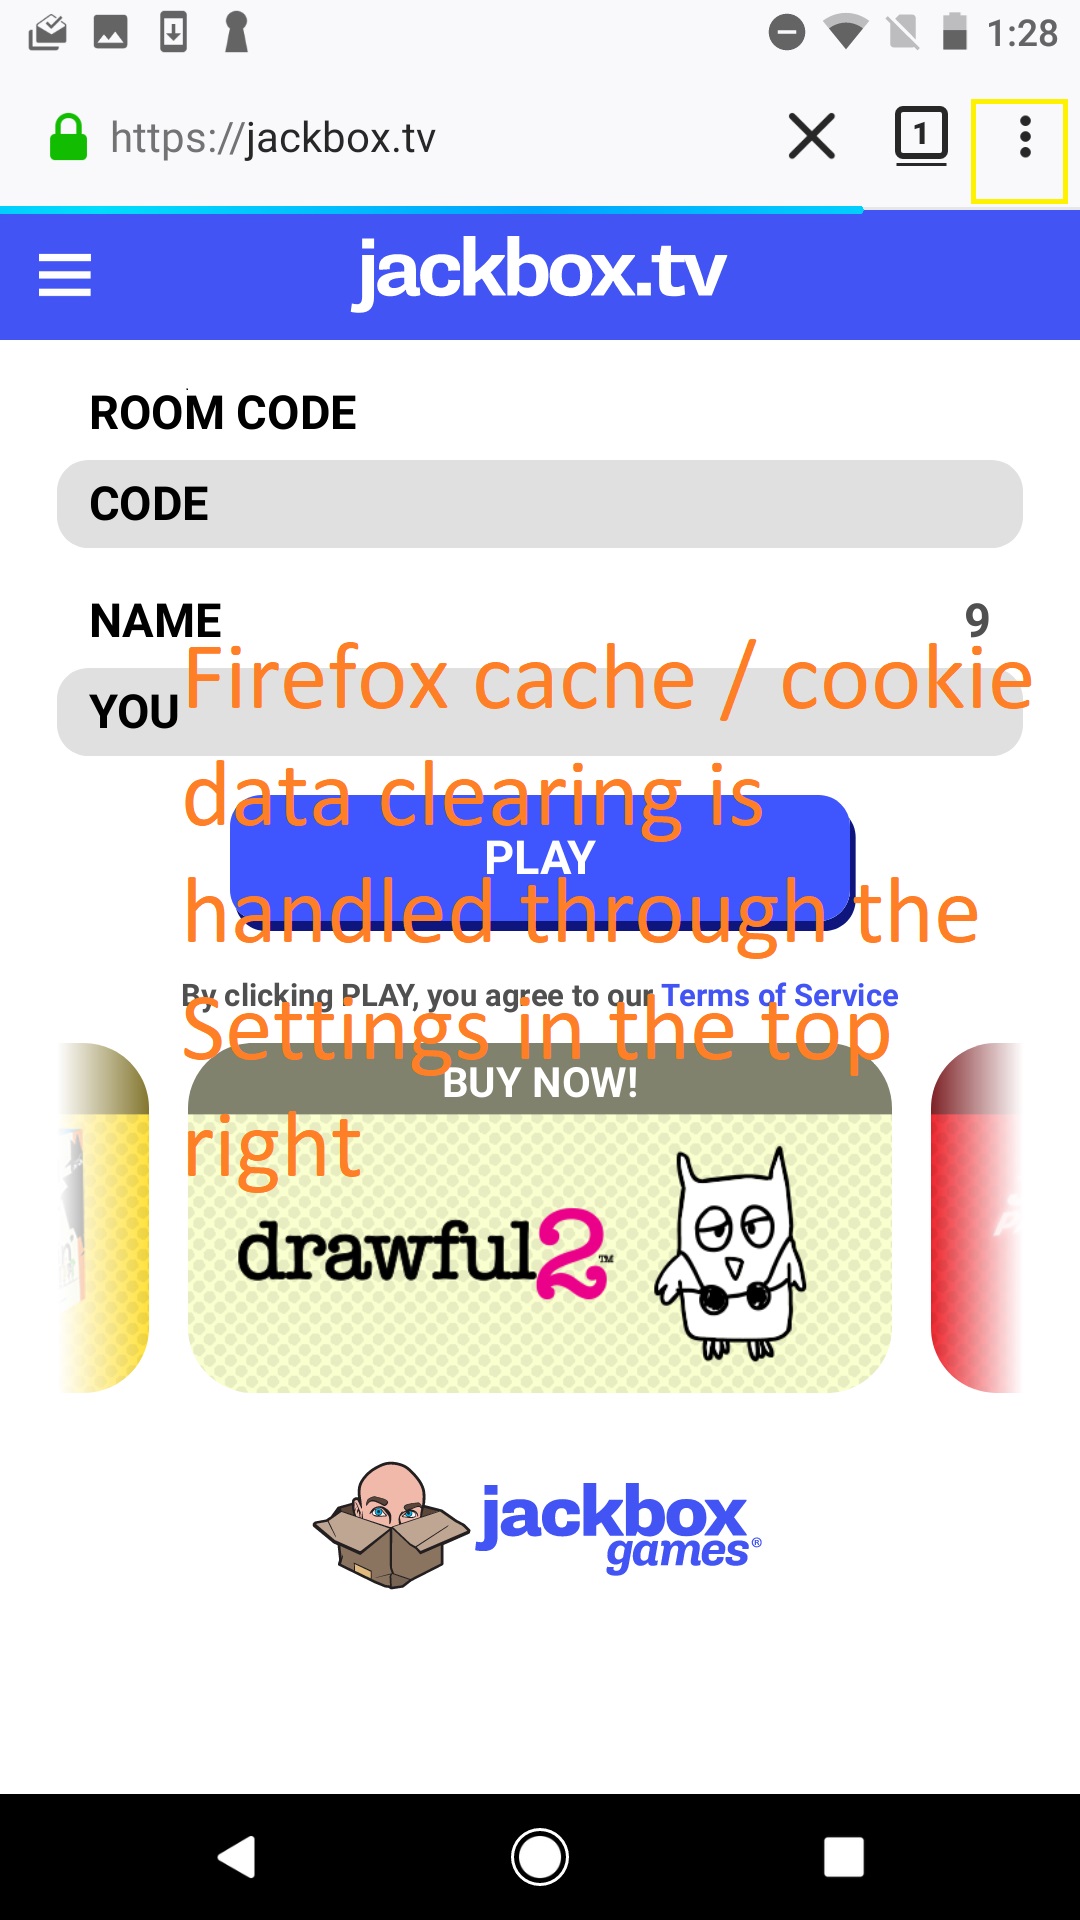 Jackbox.tv open in Android Firefox. Text: Firefox cache/cookies are managed through Settings - 3 vertical dots in top right.